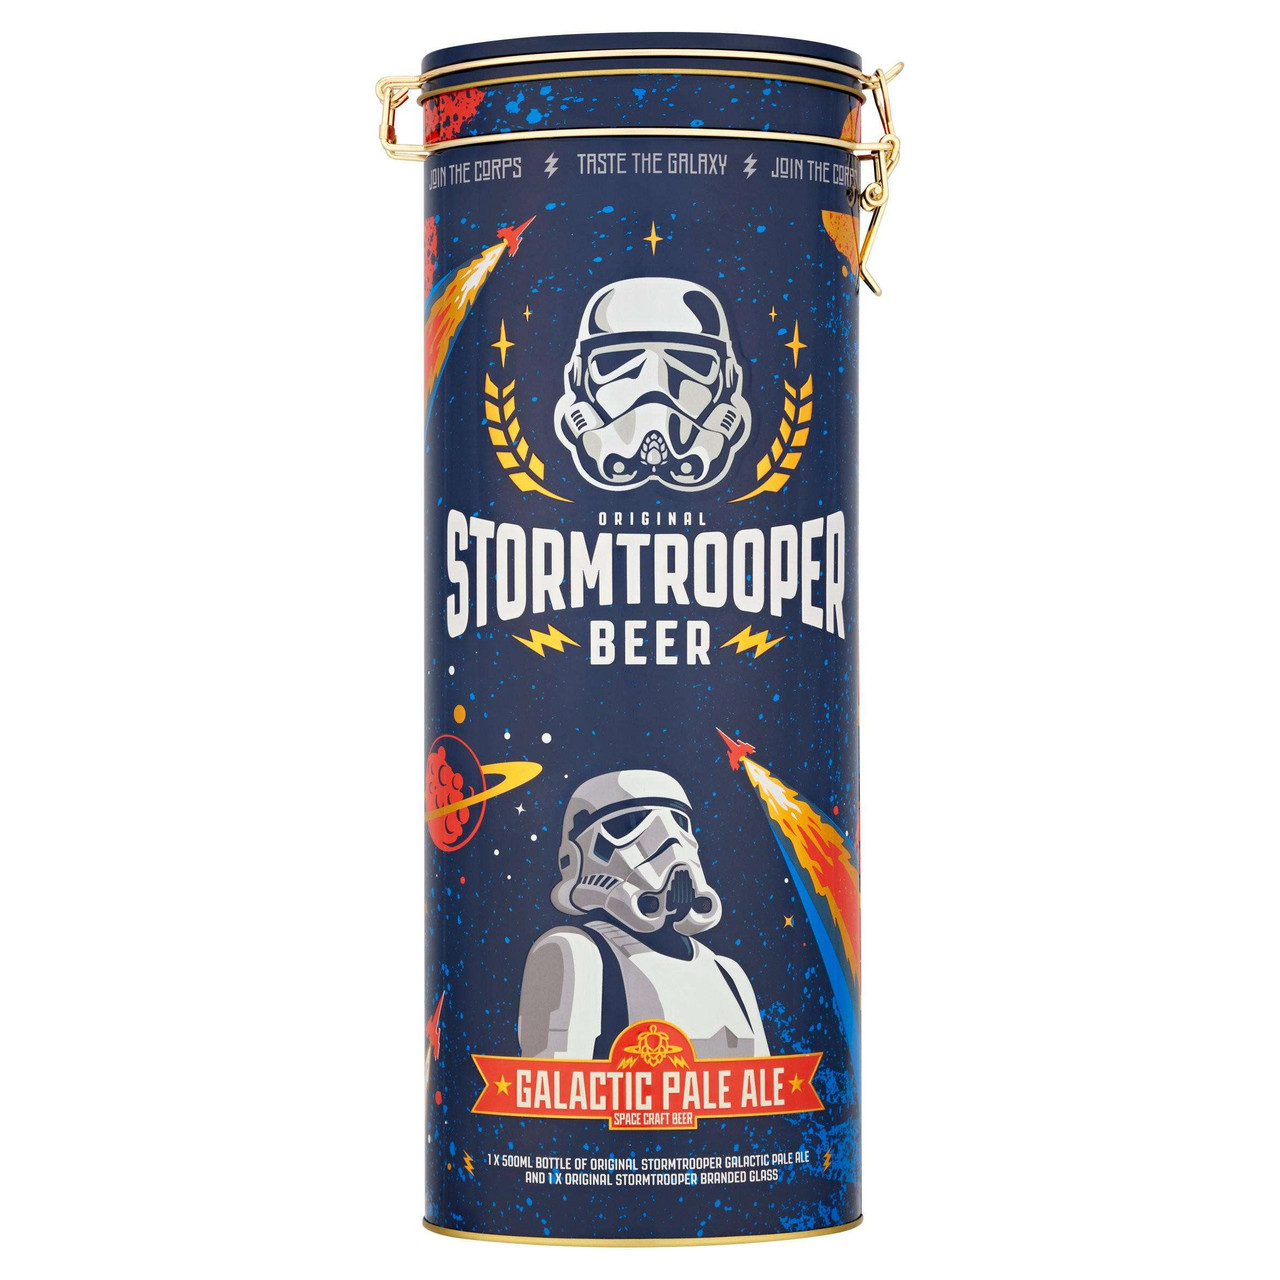 https://cdn11.bigcommerce.com/s-djdkawdsag/images/stencil/1280x1280/products/1112/4533/Stormtrooper-Galactic-Pale-Ale-Beer-Gift-Tin-500ml-Branded-Glass-Gifts-Frabco-Direct_4354__37912.1696951829.jpg?c=1&imbypass=on